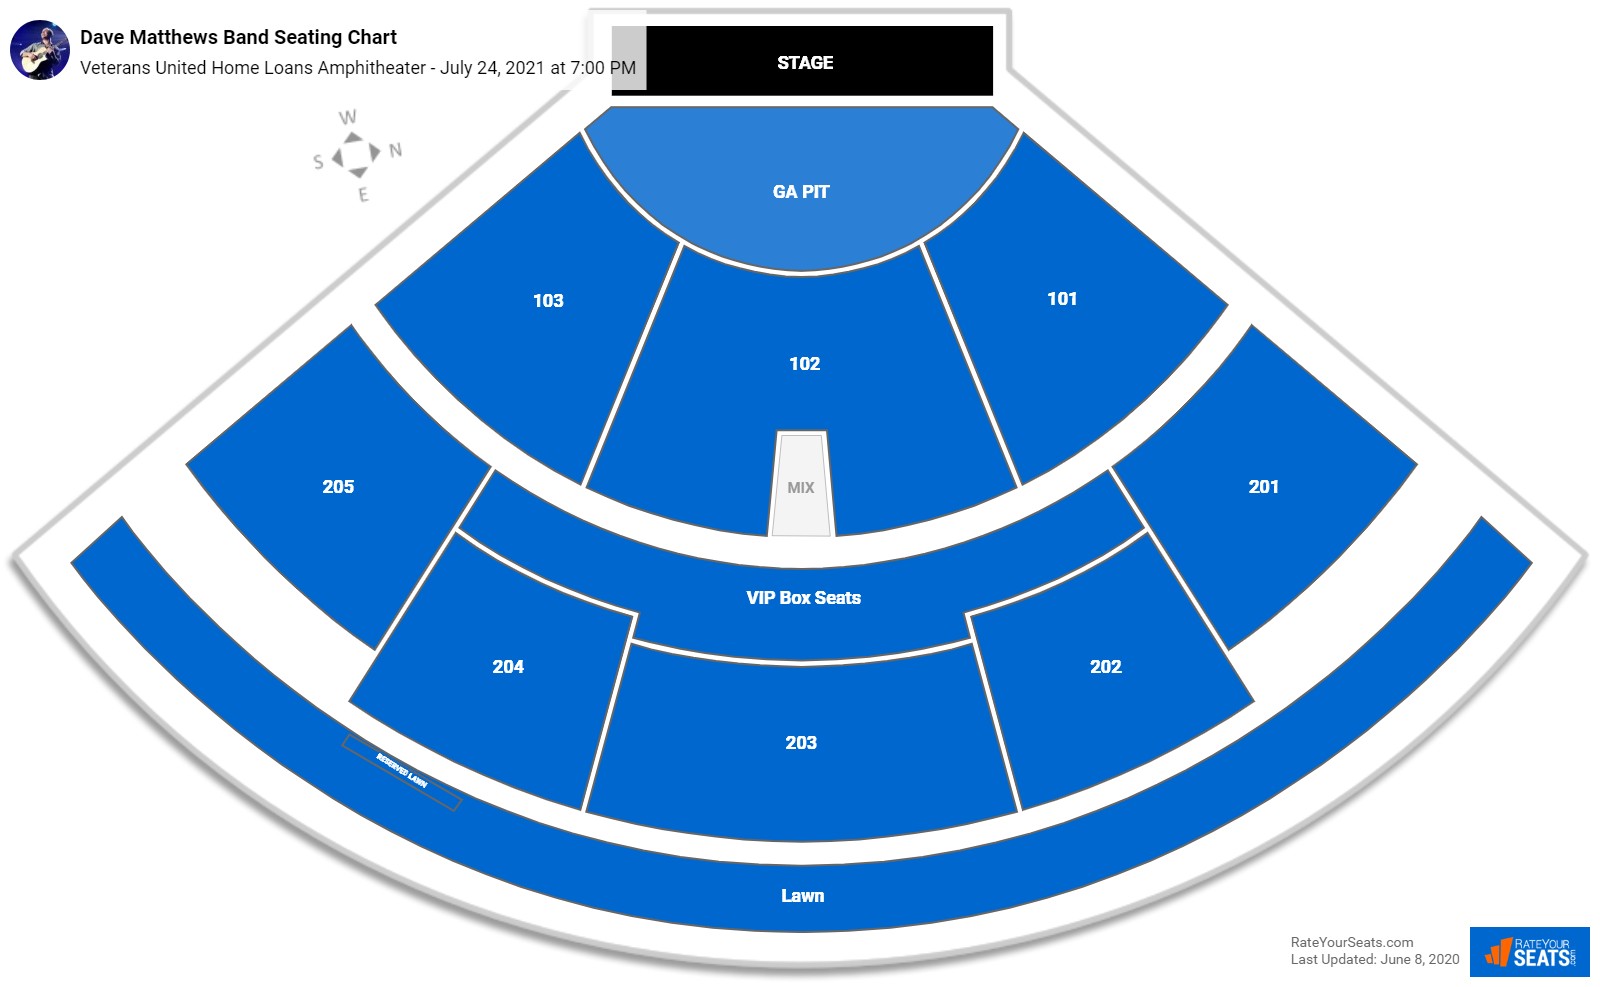 Veterans United Home Loans Amphitheater Seating Chart